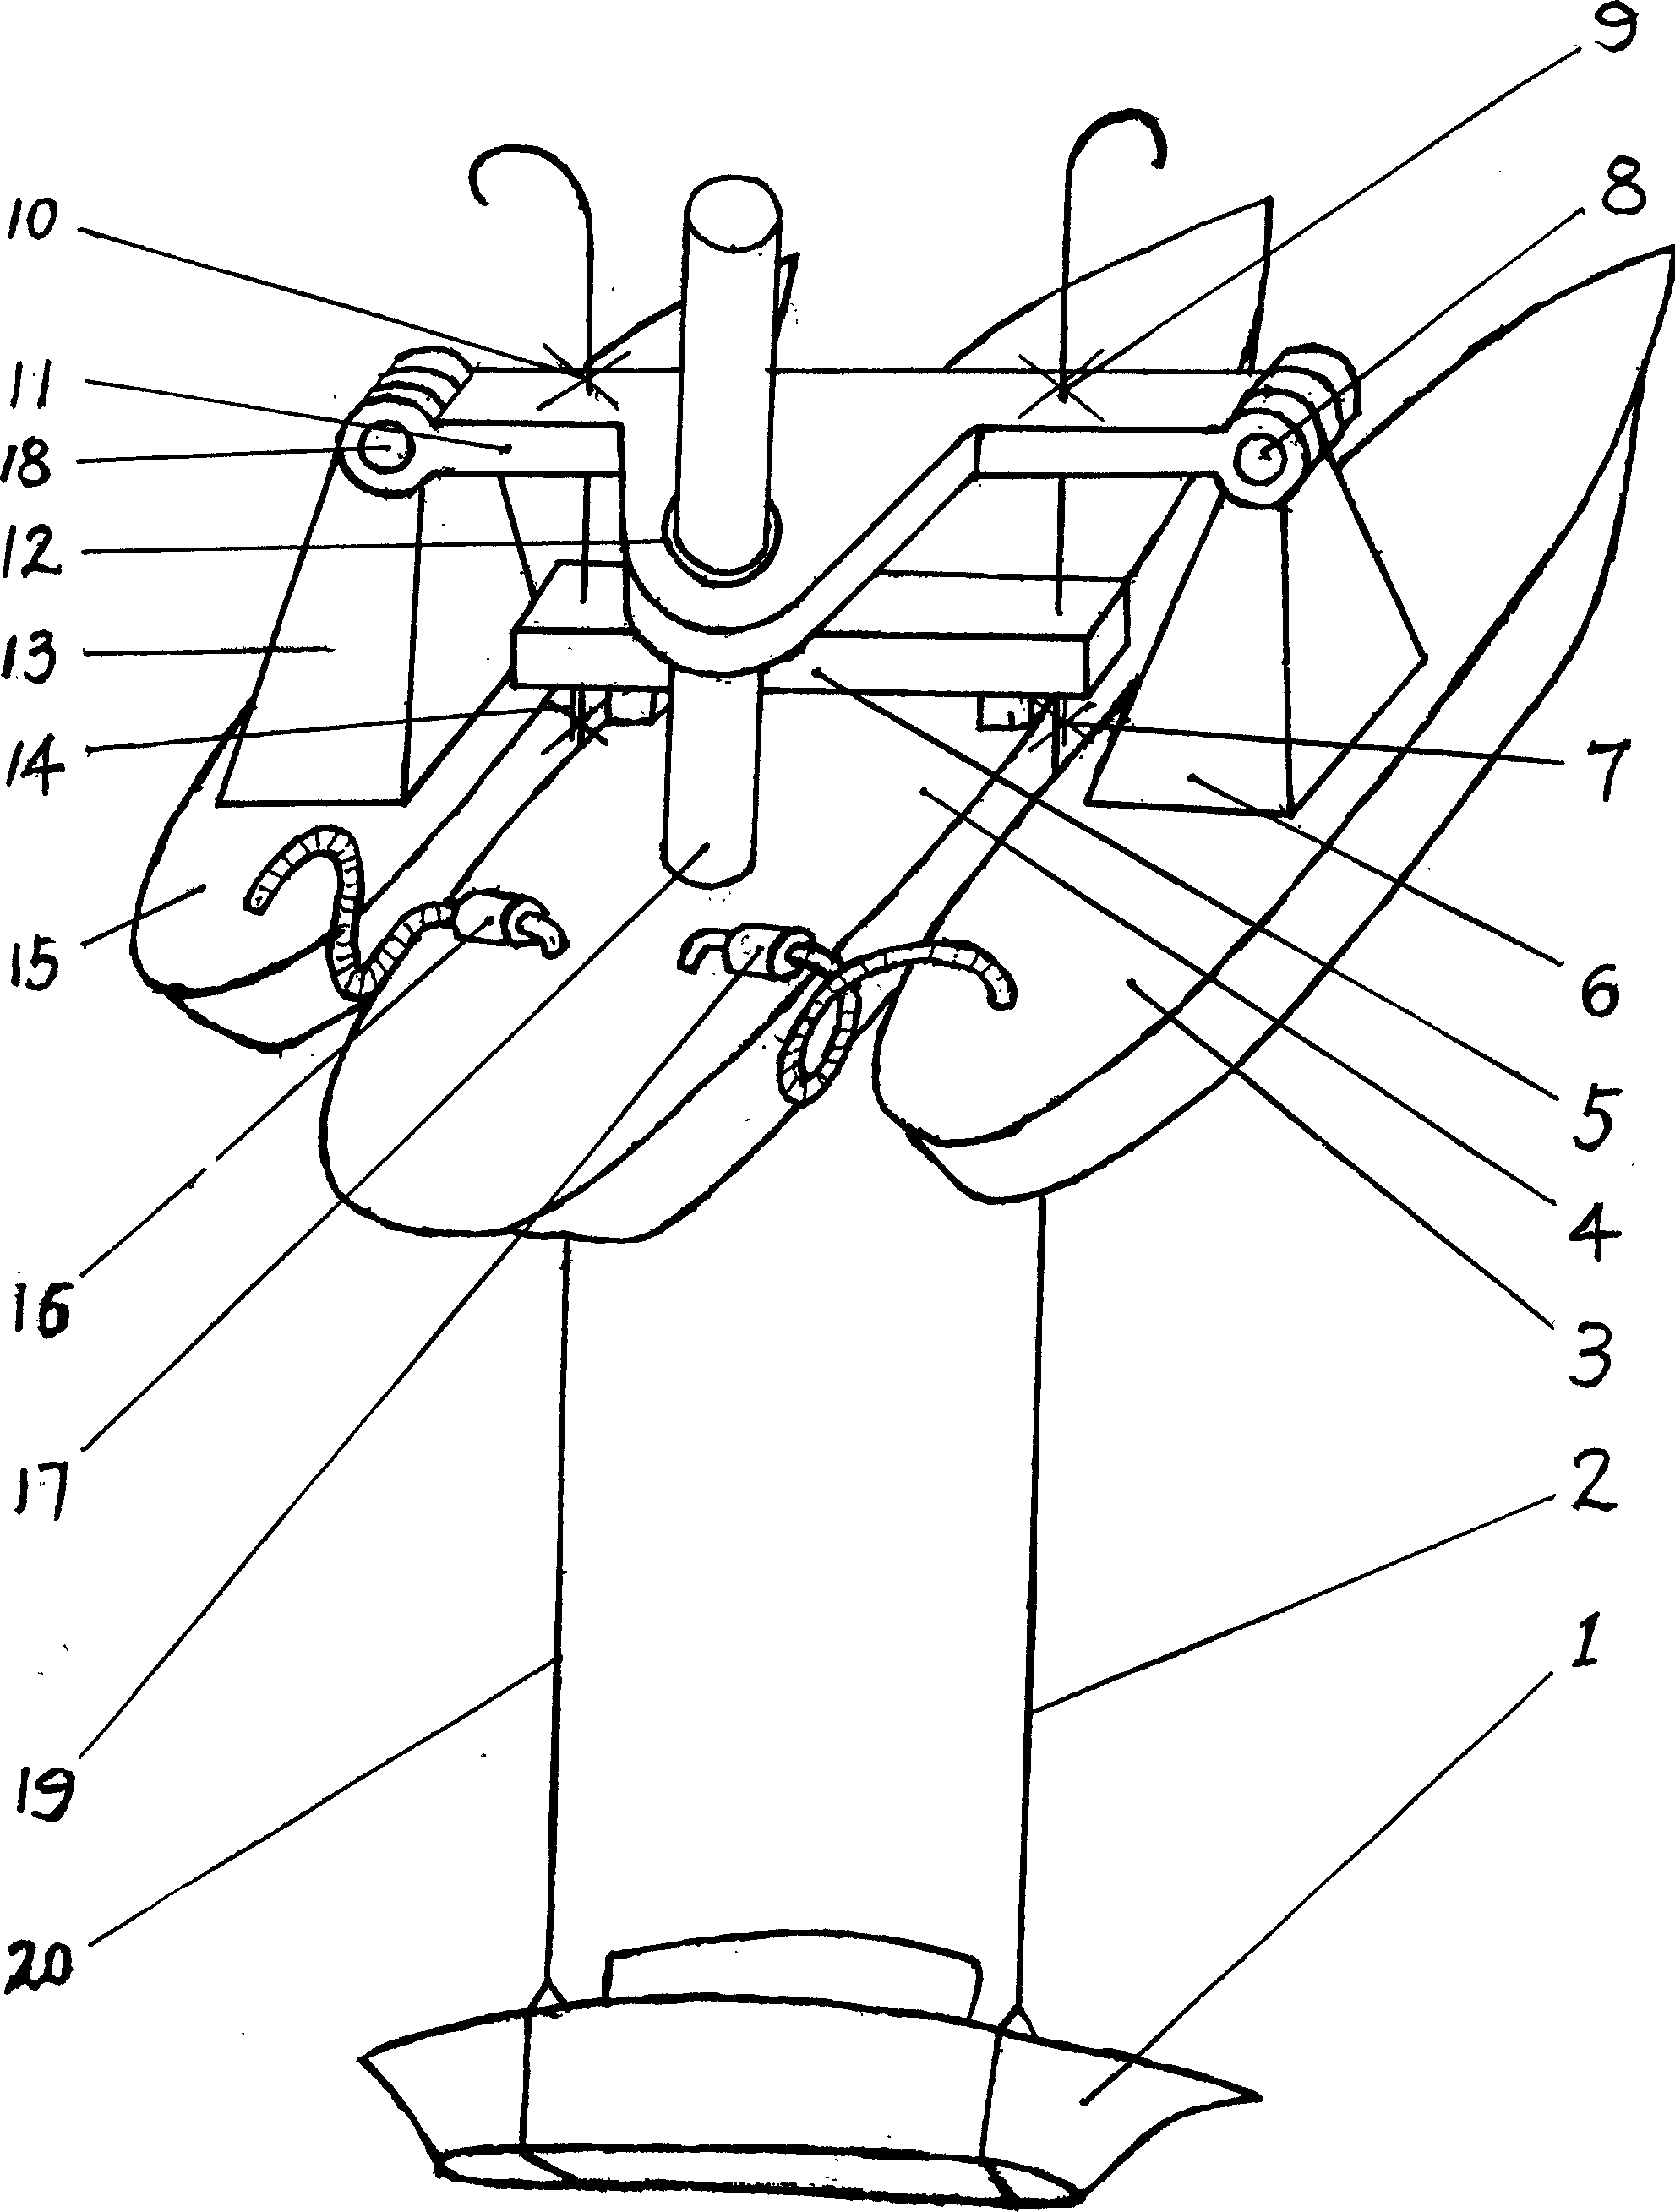 Method of salvaging applying ship loading and unloading and its device